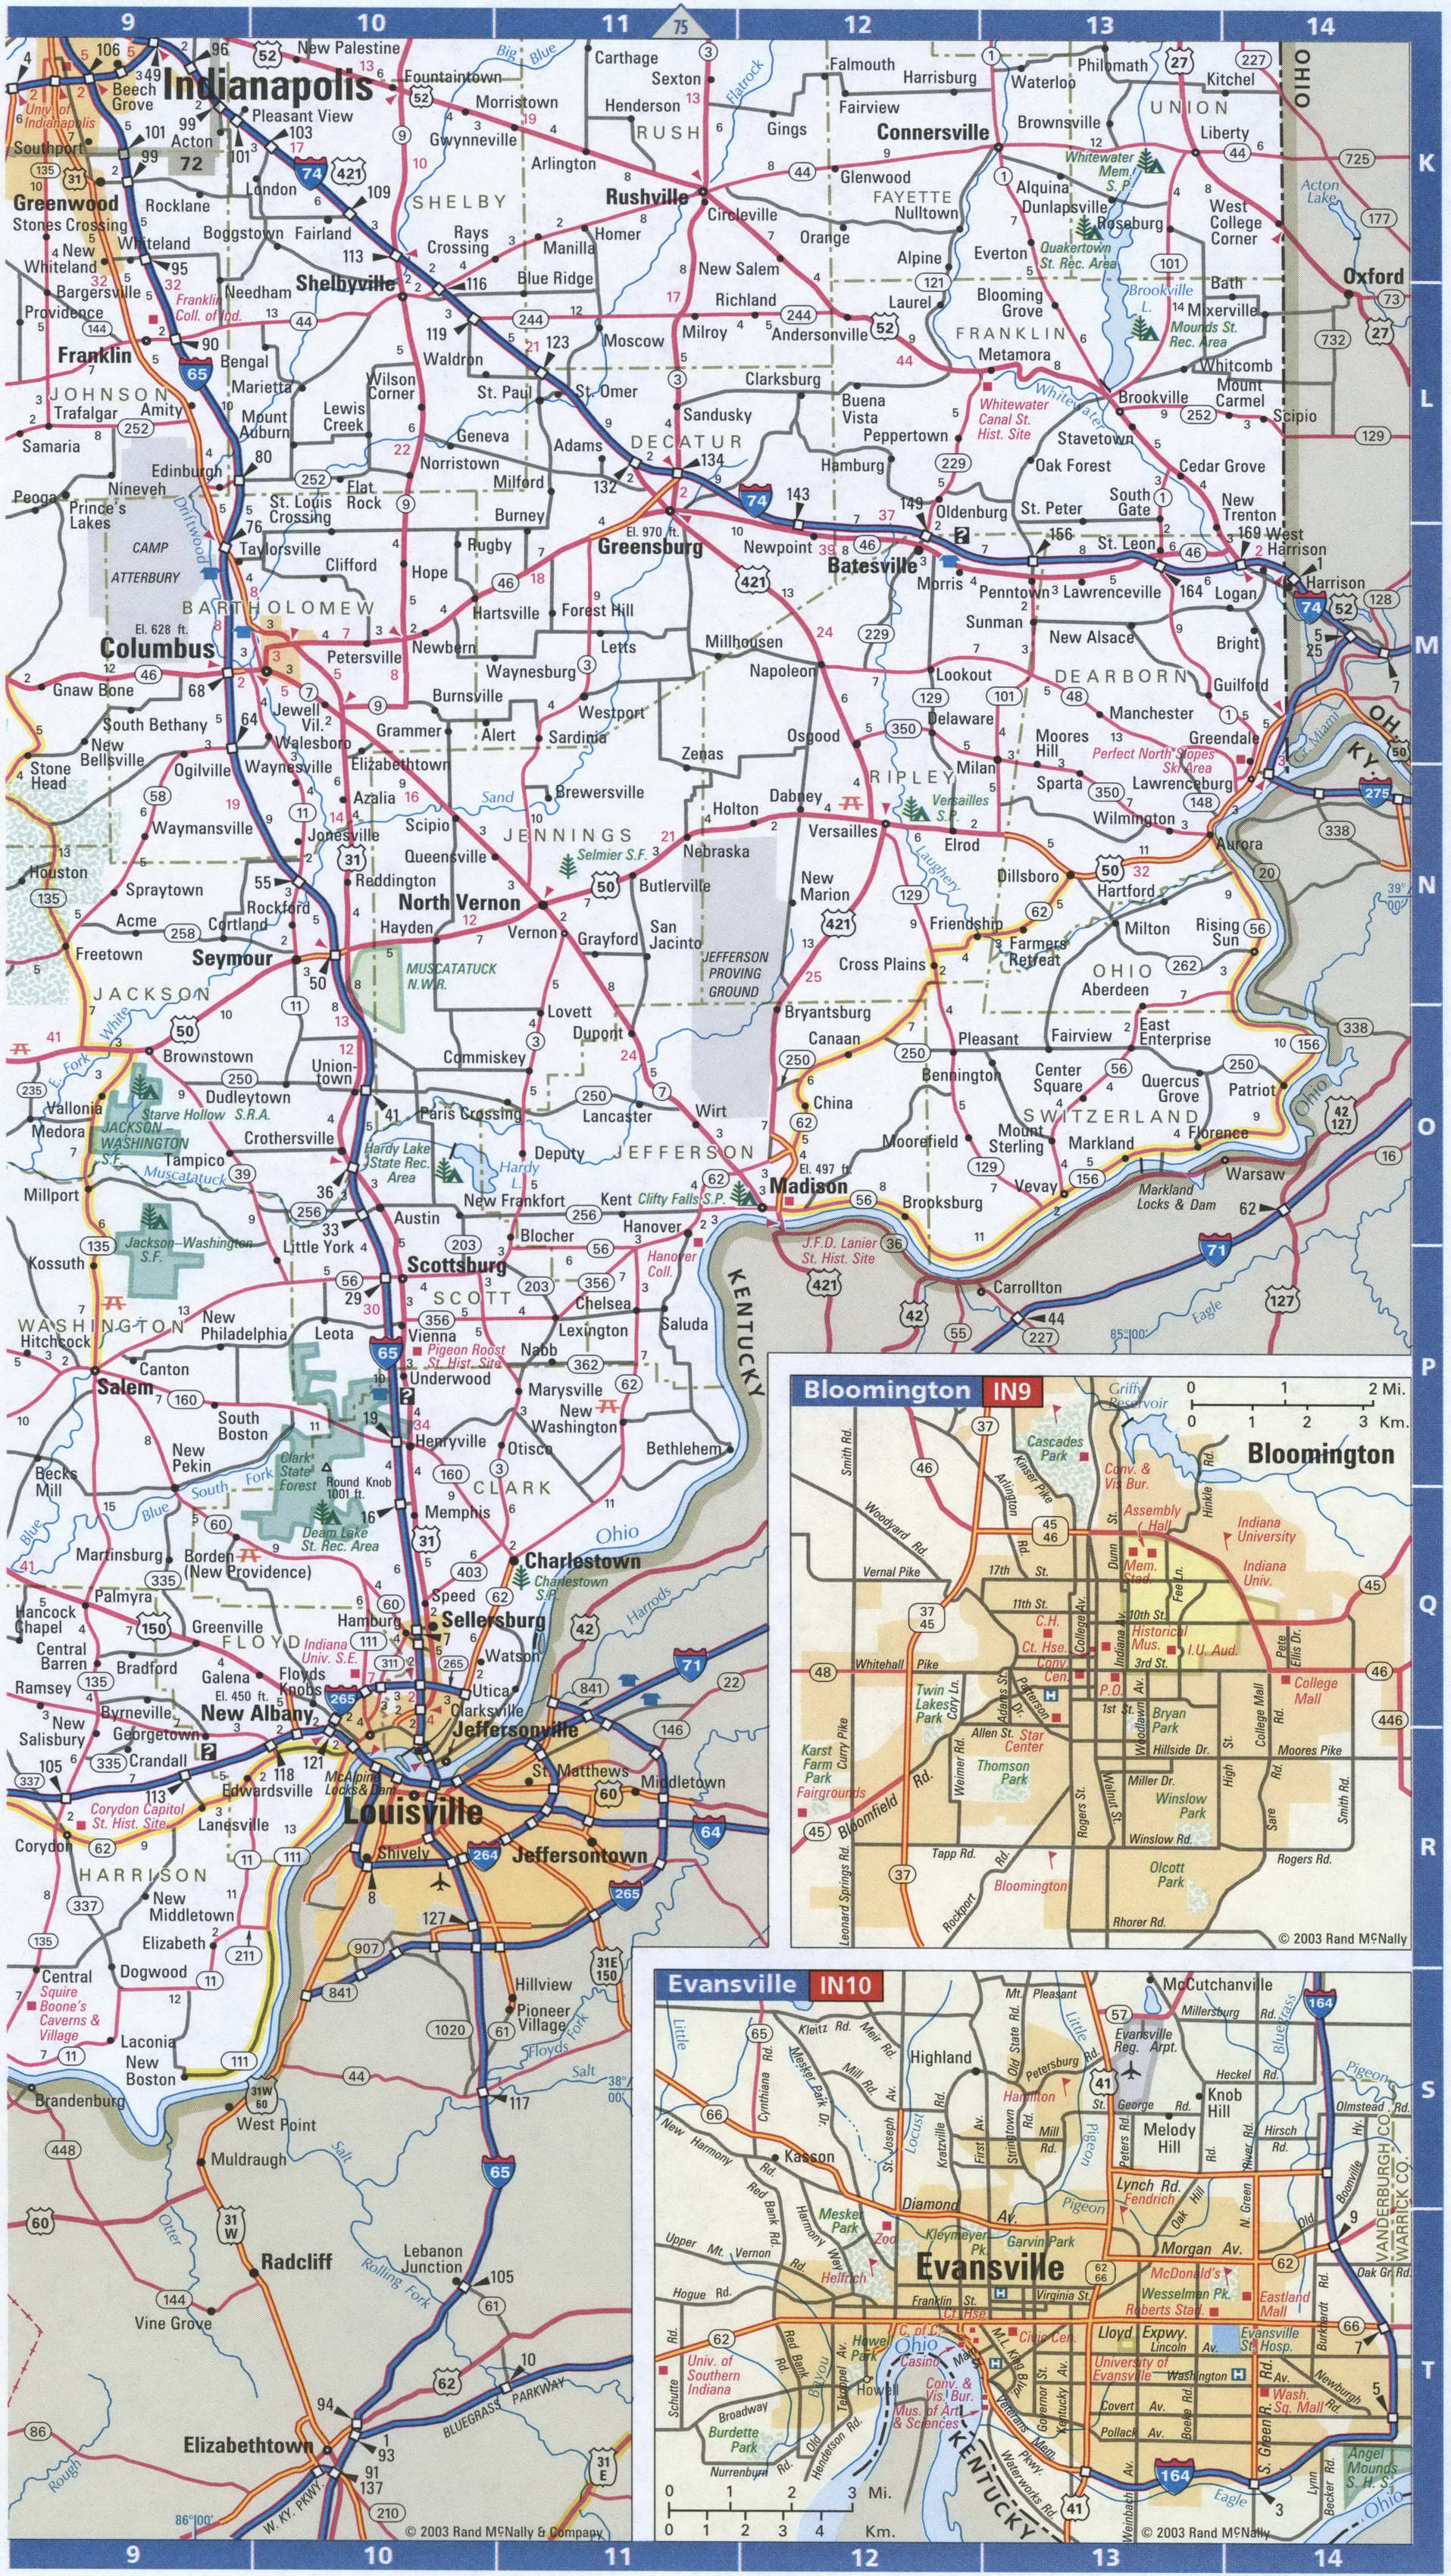 Indiana south road map